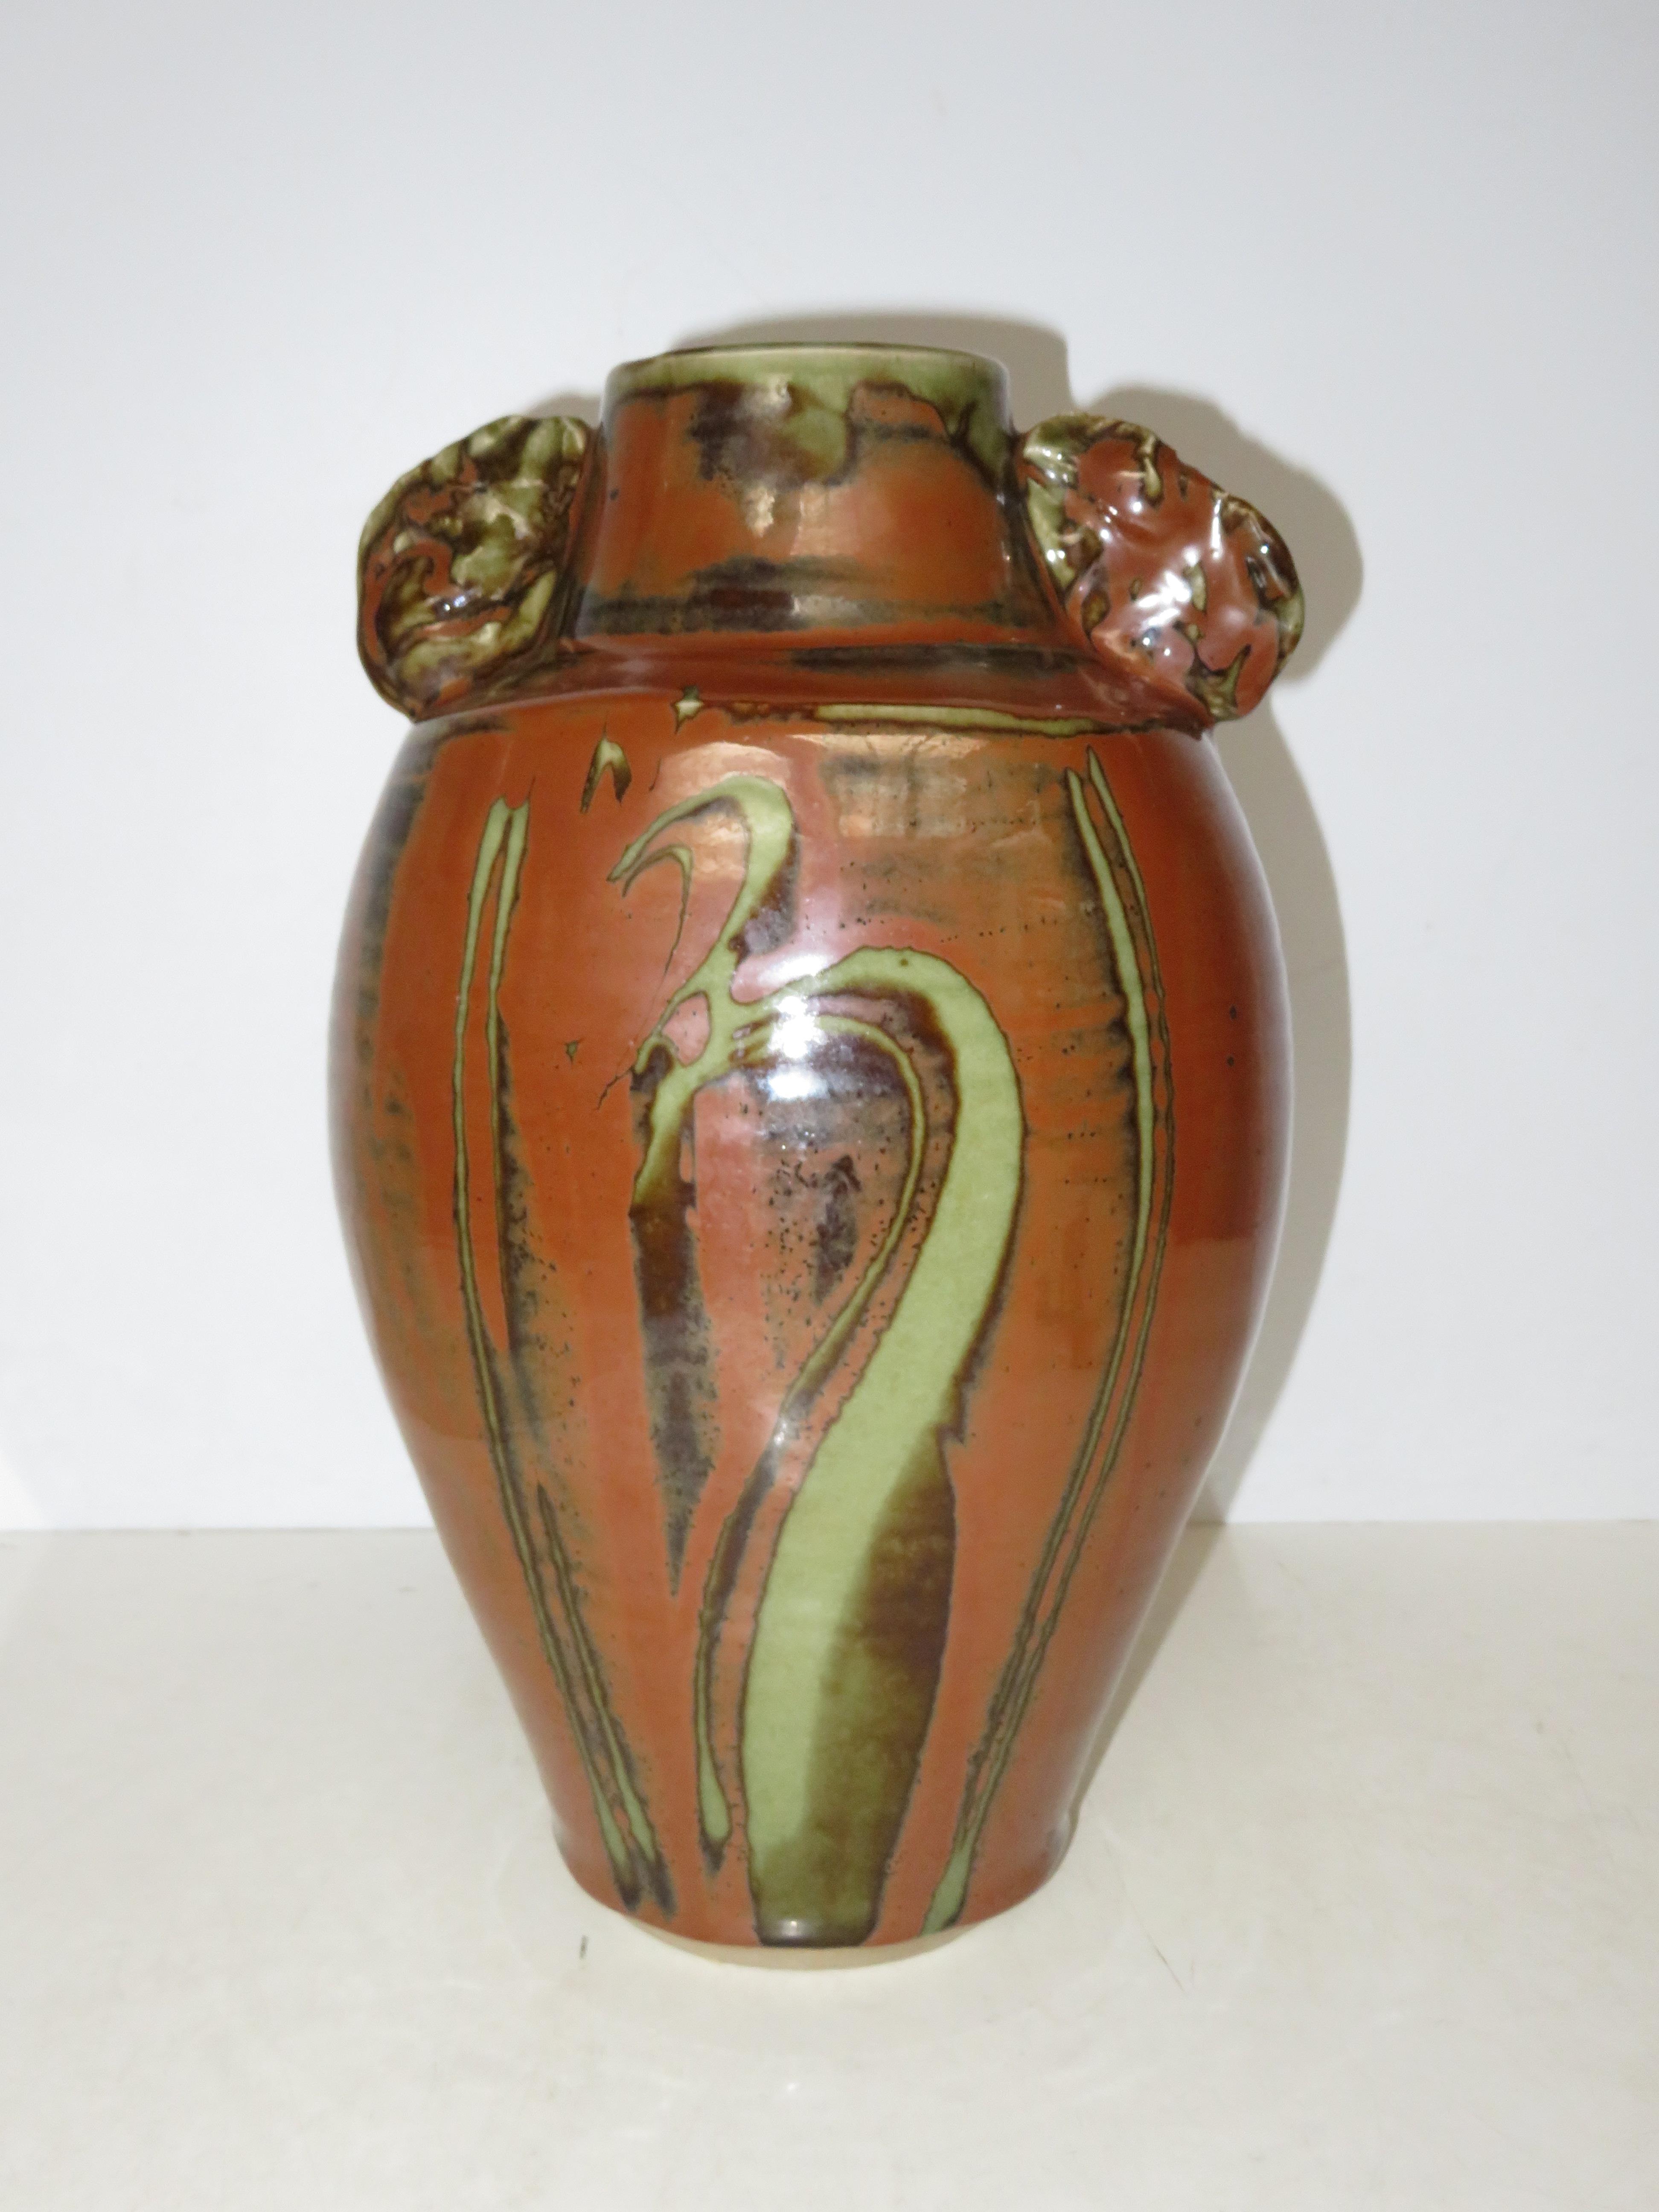 Studio pottery vase by David Frith c1943. Height 3